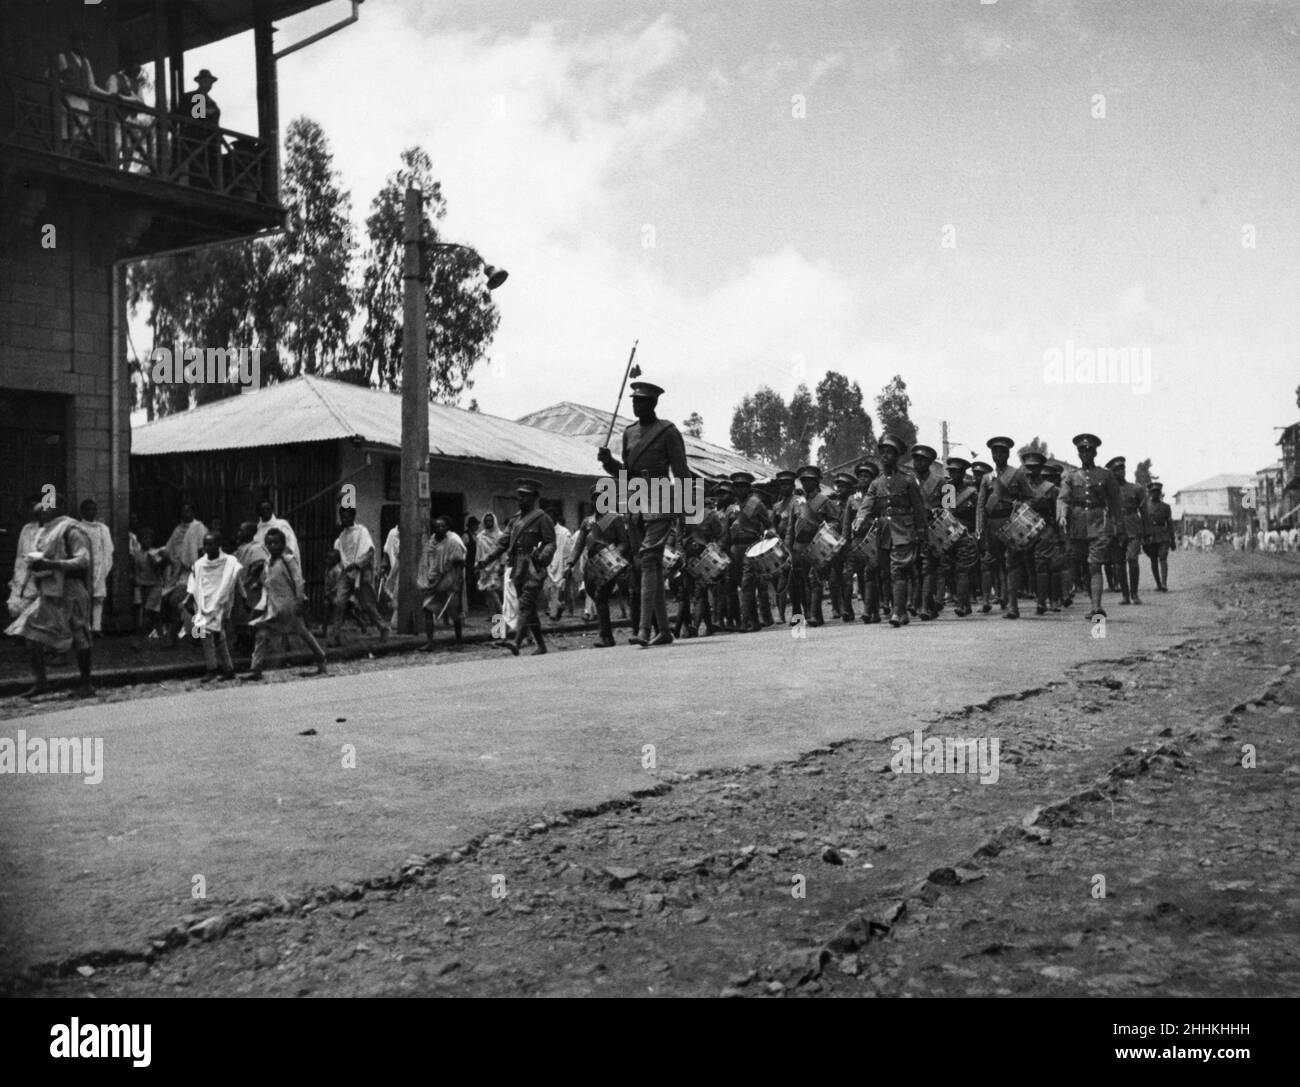 Abyssinian War September 1935The band of the Imperial Ethiopian Guard marching through Addis Ababa, lead by a gigantic Drum Major. Leads the column of soldiers heading to the south and the Ogadan front to confront the Italian invasion Stock Photo